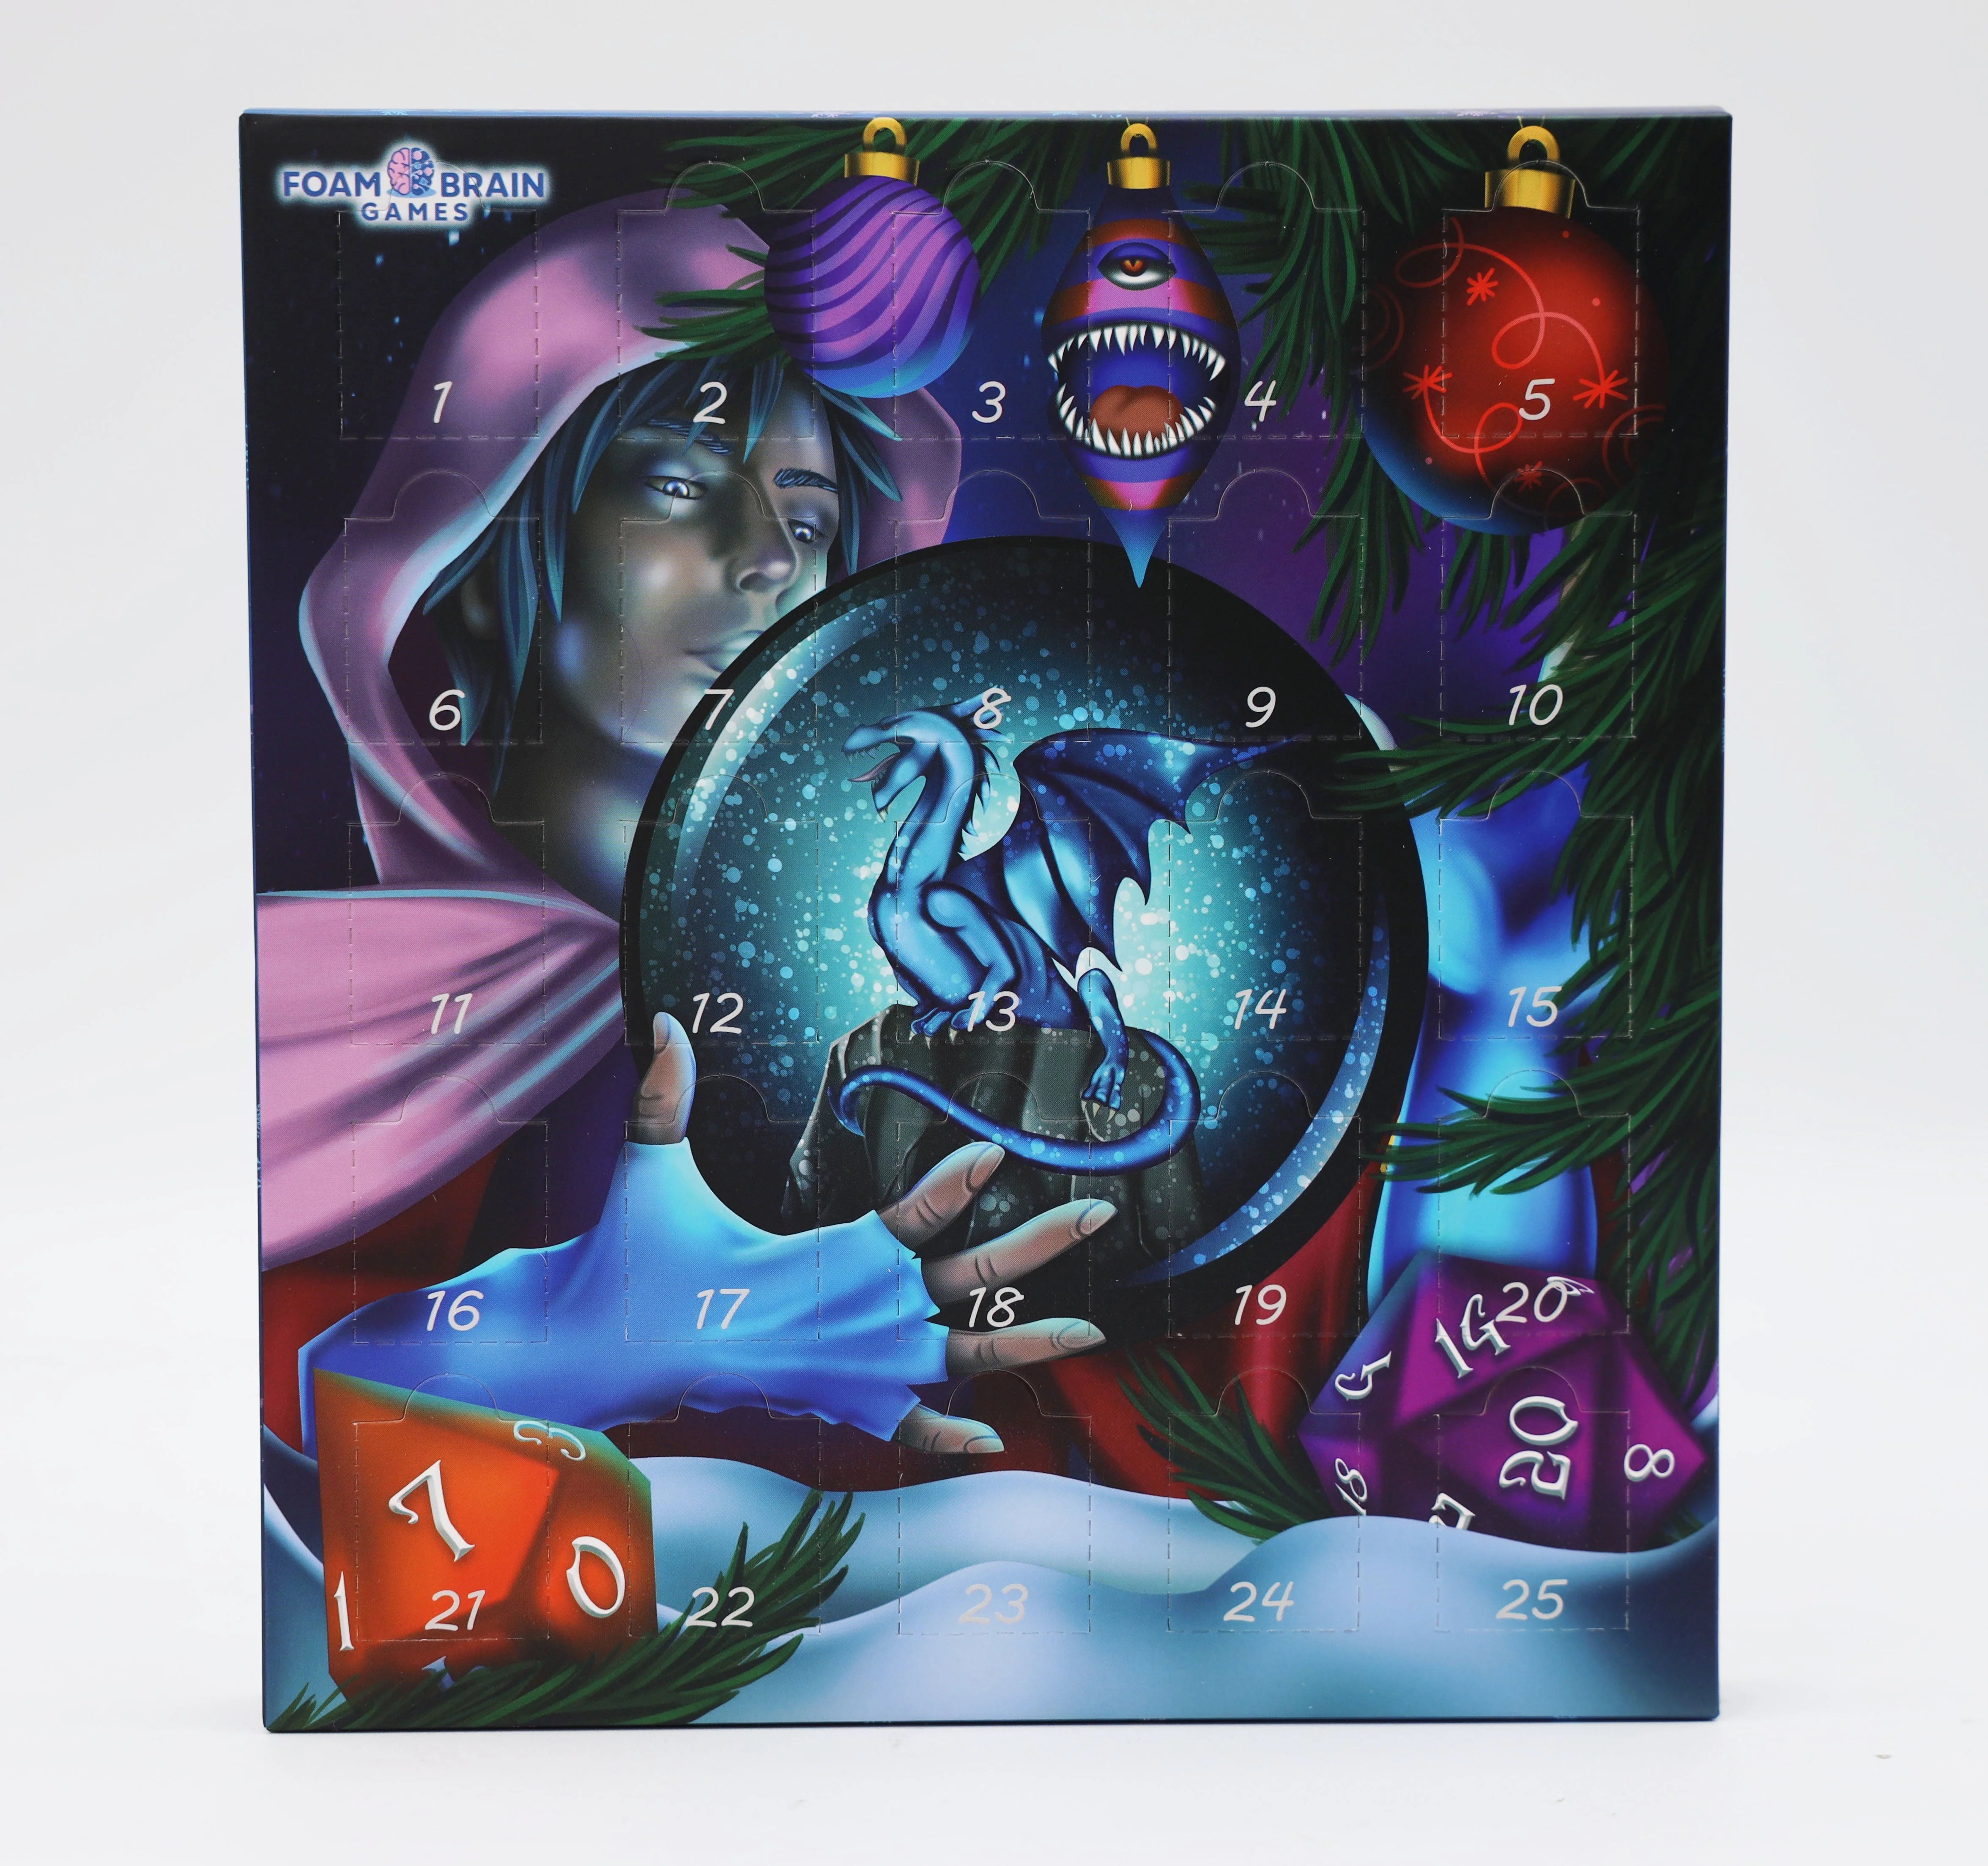 DICE ADVENT CALENDAR 2023 Dice & Counters Foam Brain Games    | Red Claw Gaming